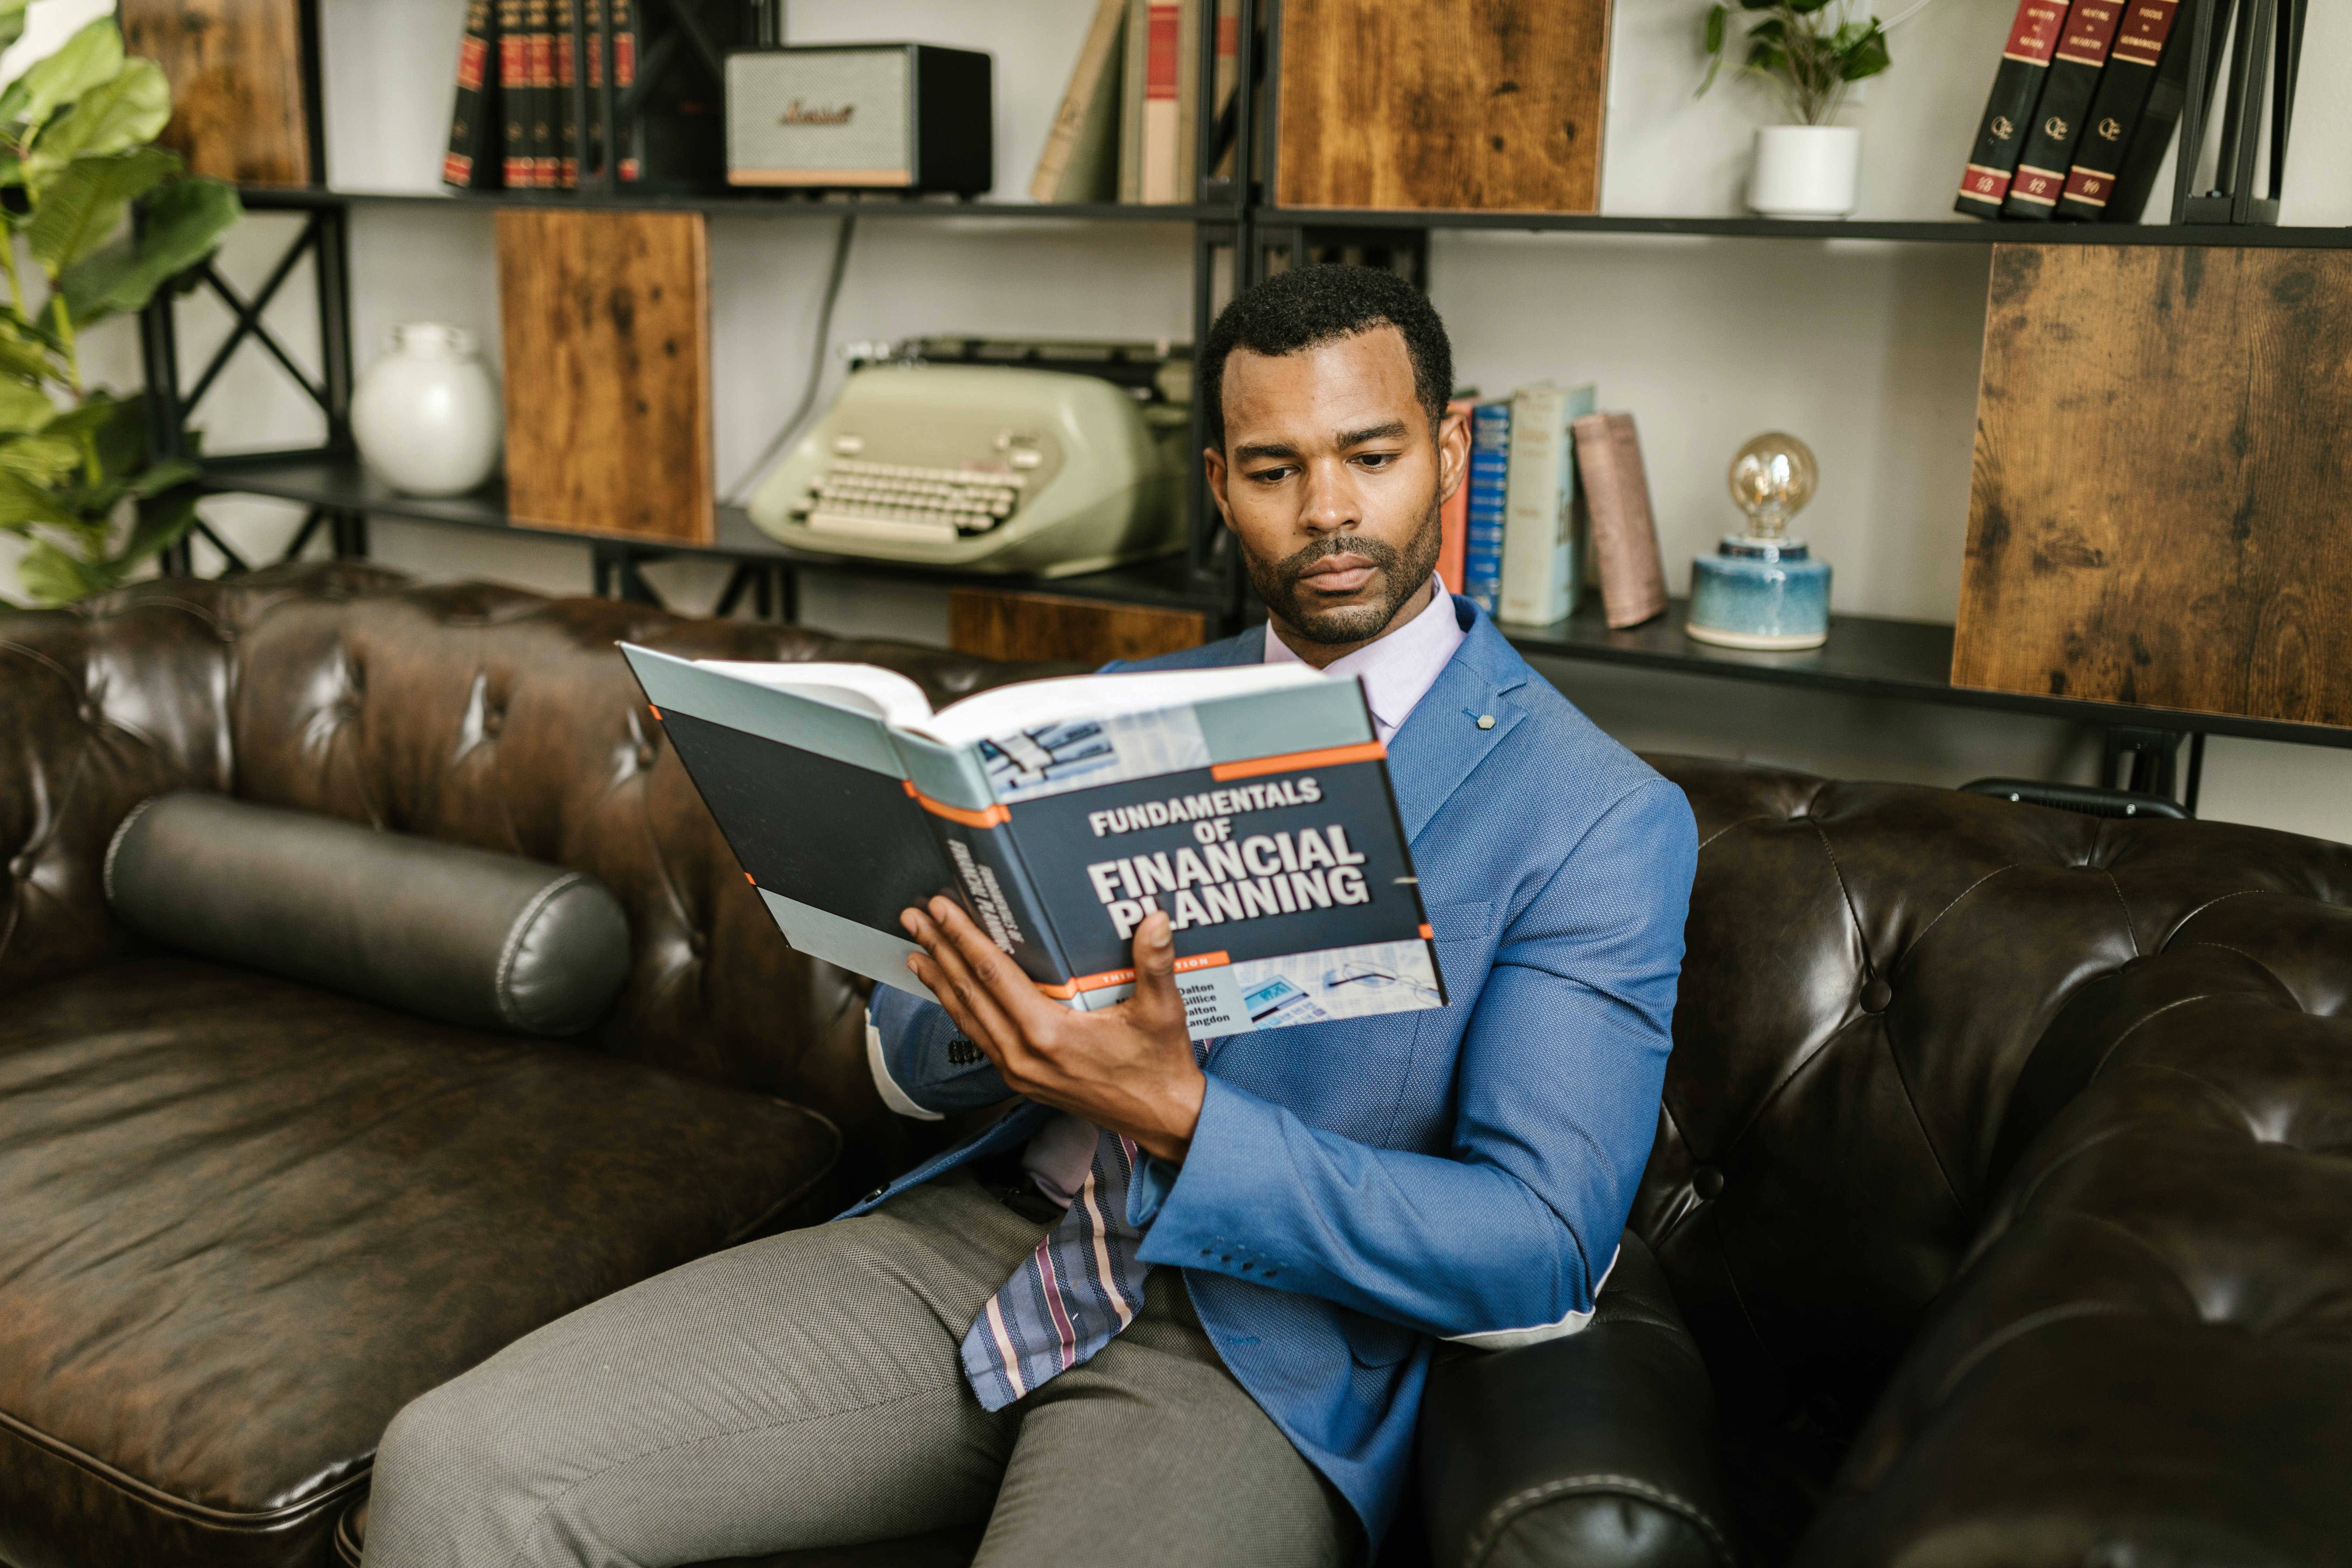 A man reading about the "Fundamentals of Financial Planning" | Source: Pexels